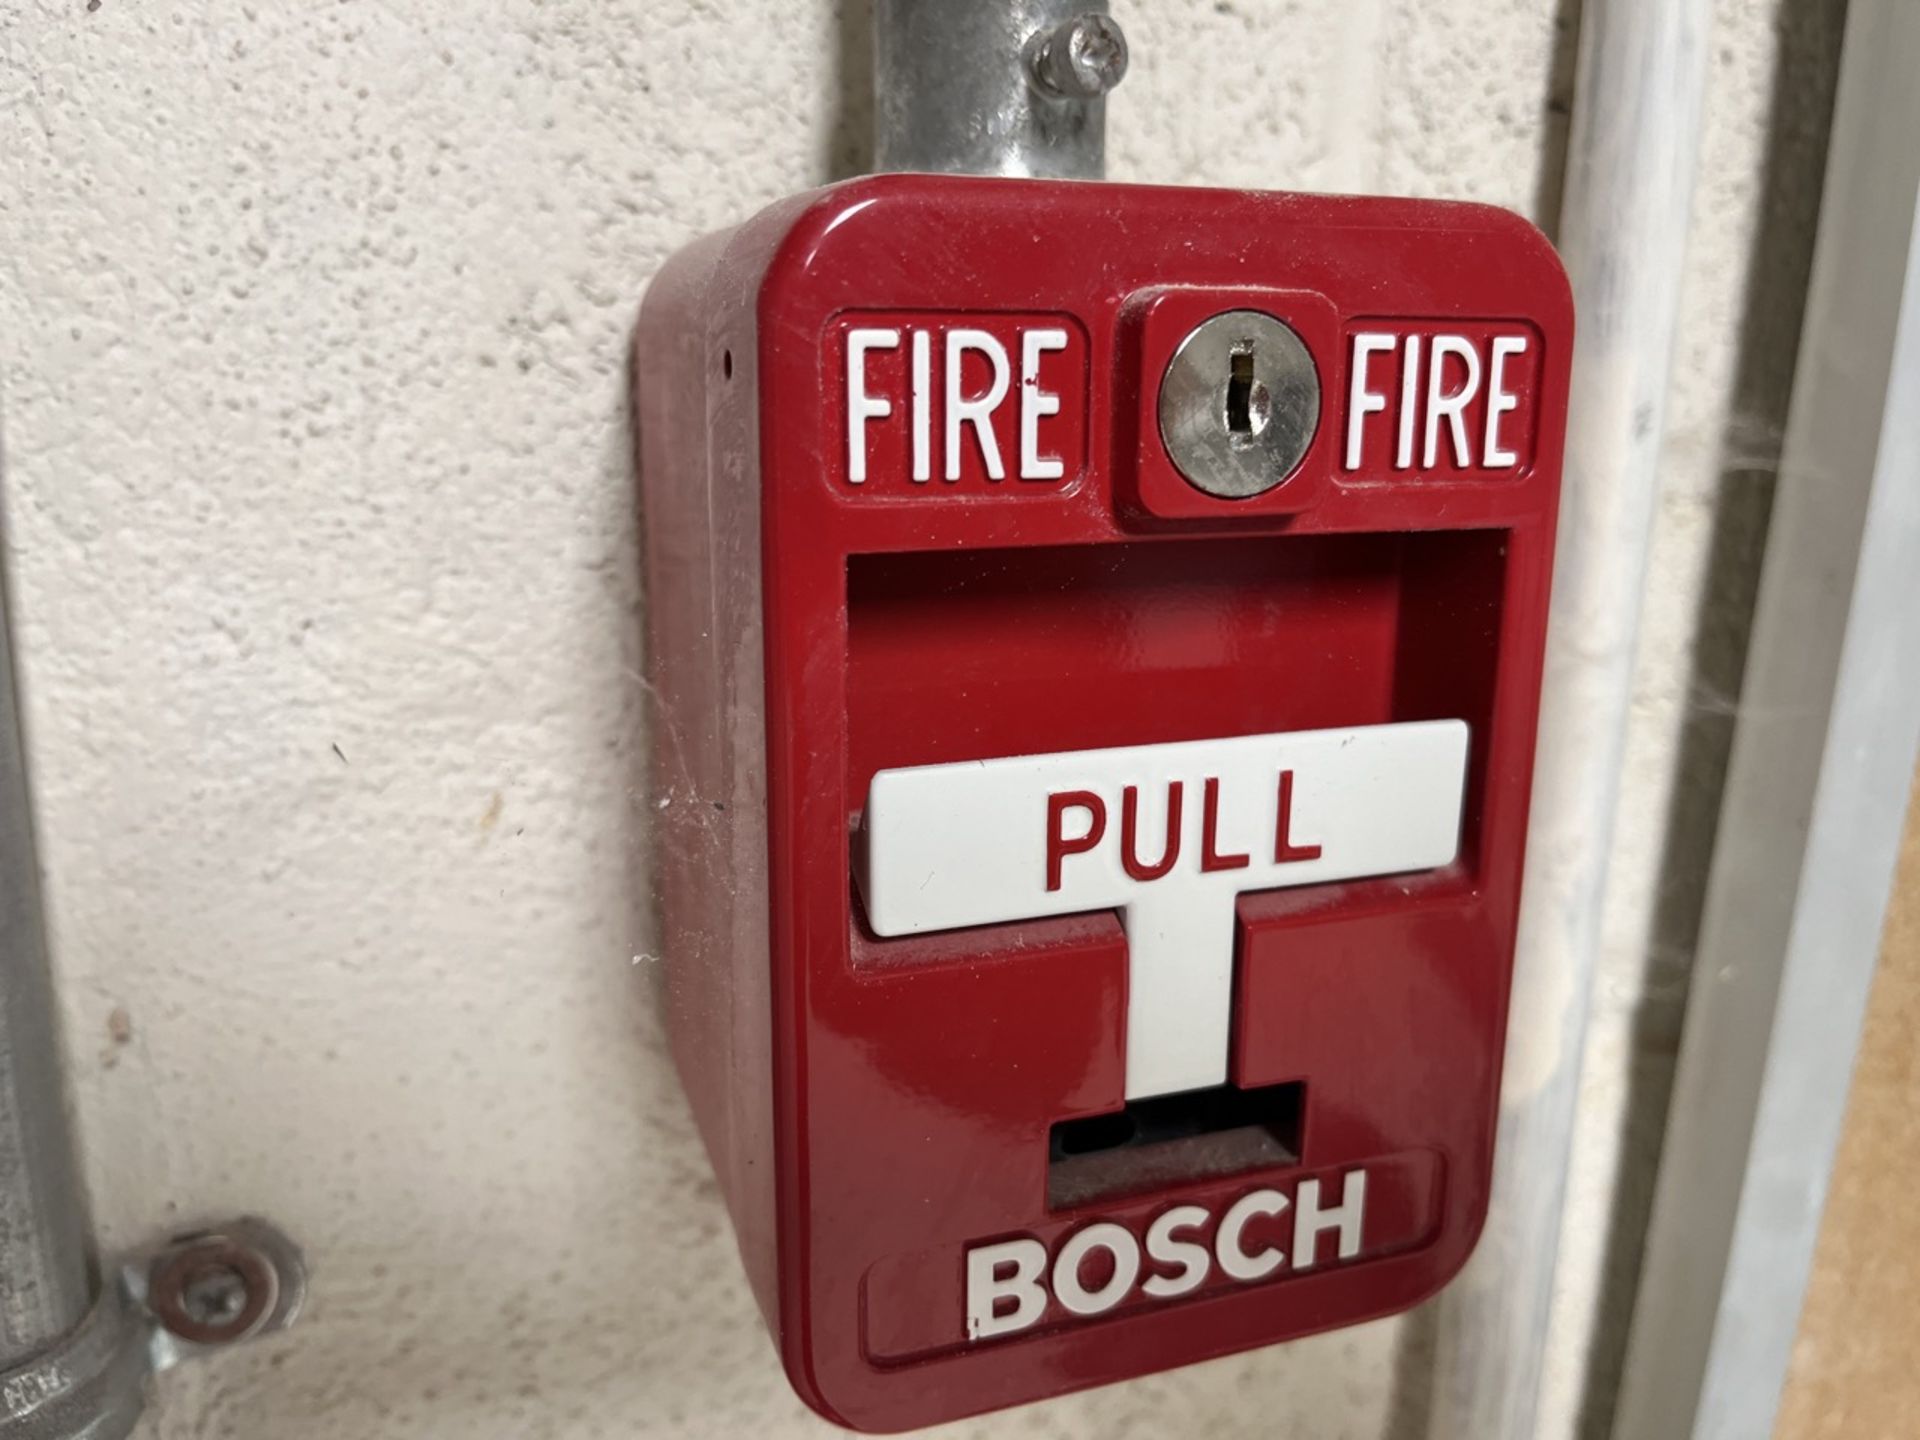 Bosh Fire alarm system of approximately 10 station levers, includes conduit piping system and smoke - Image 2 of 3